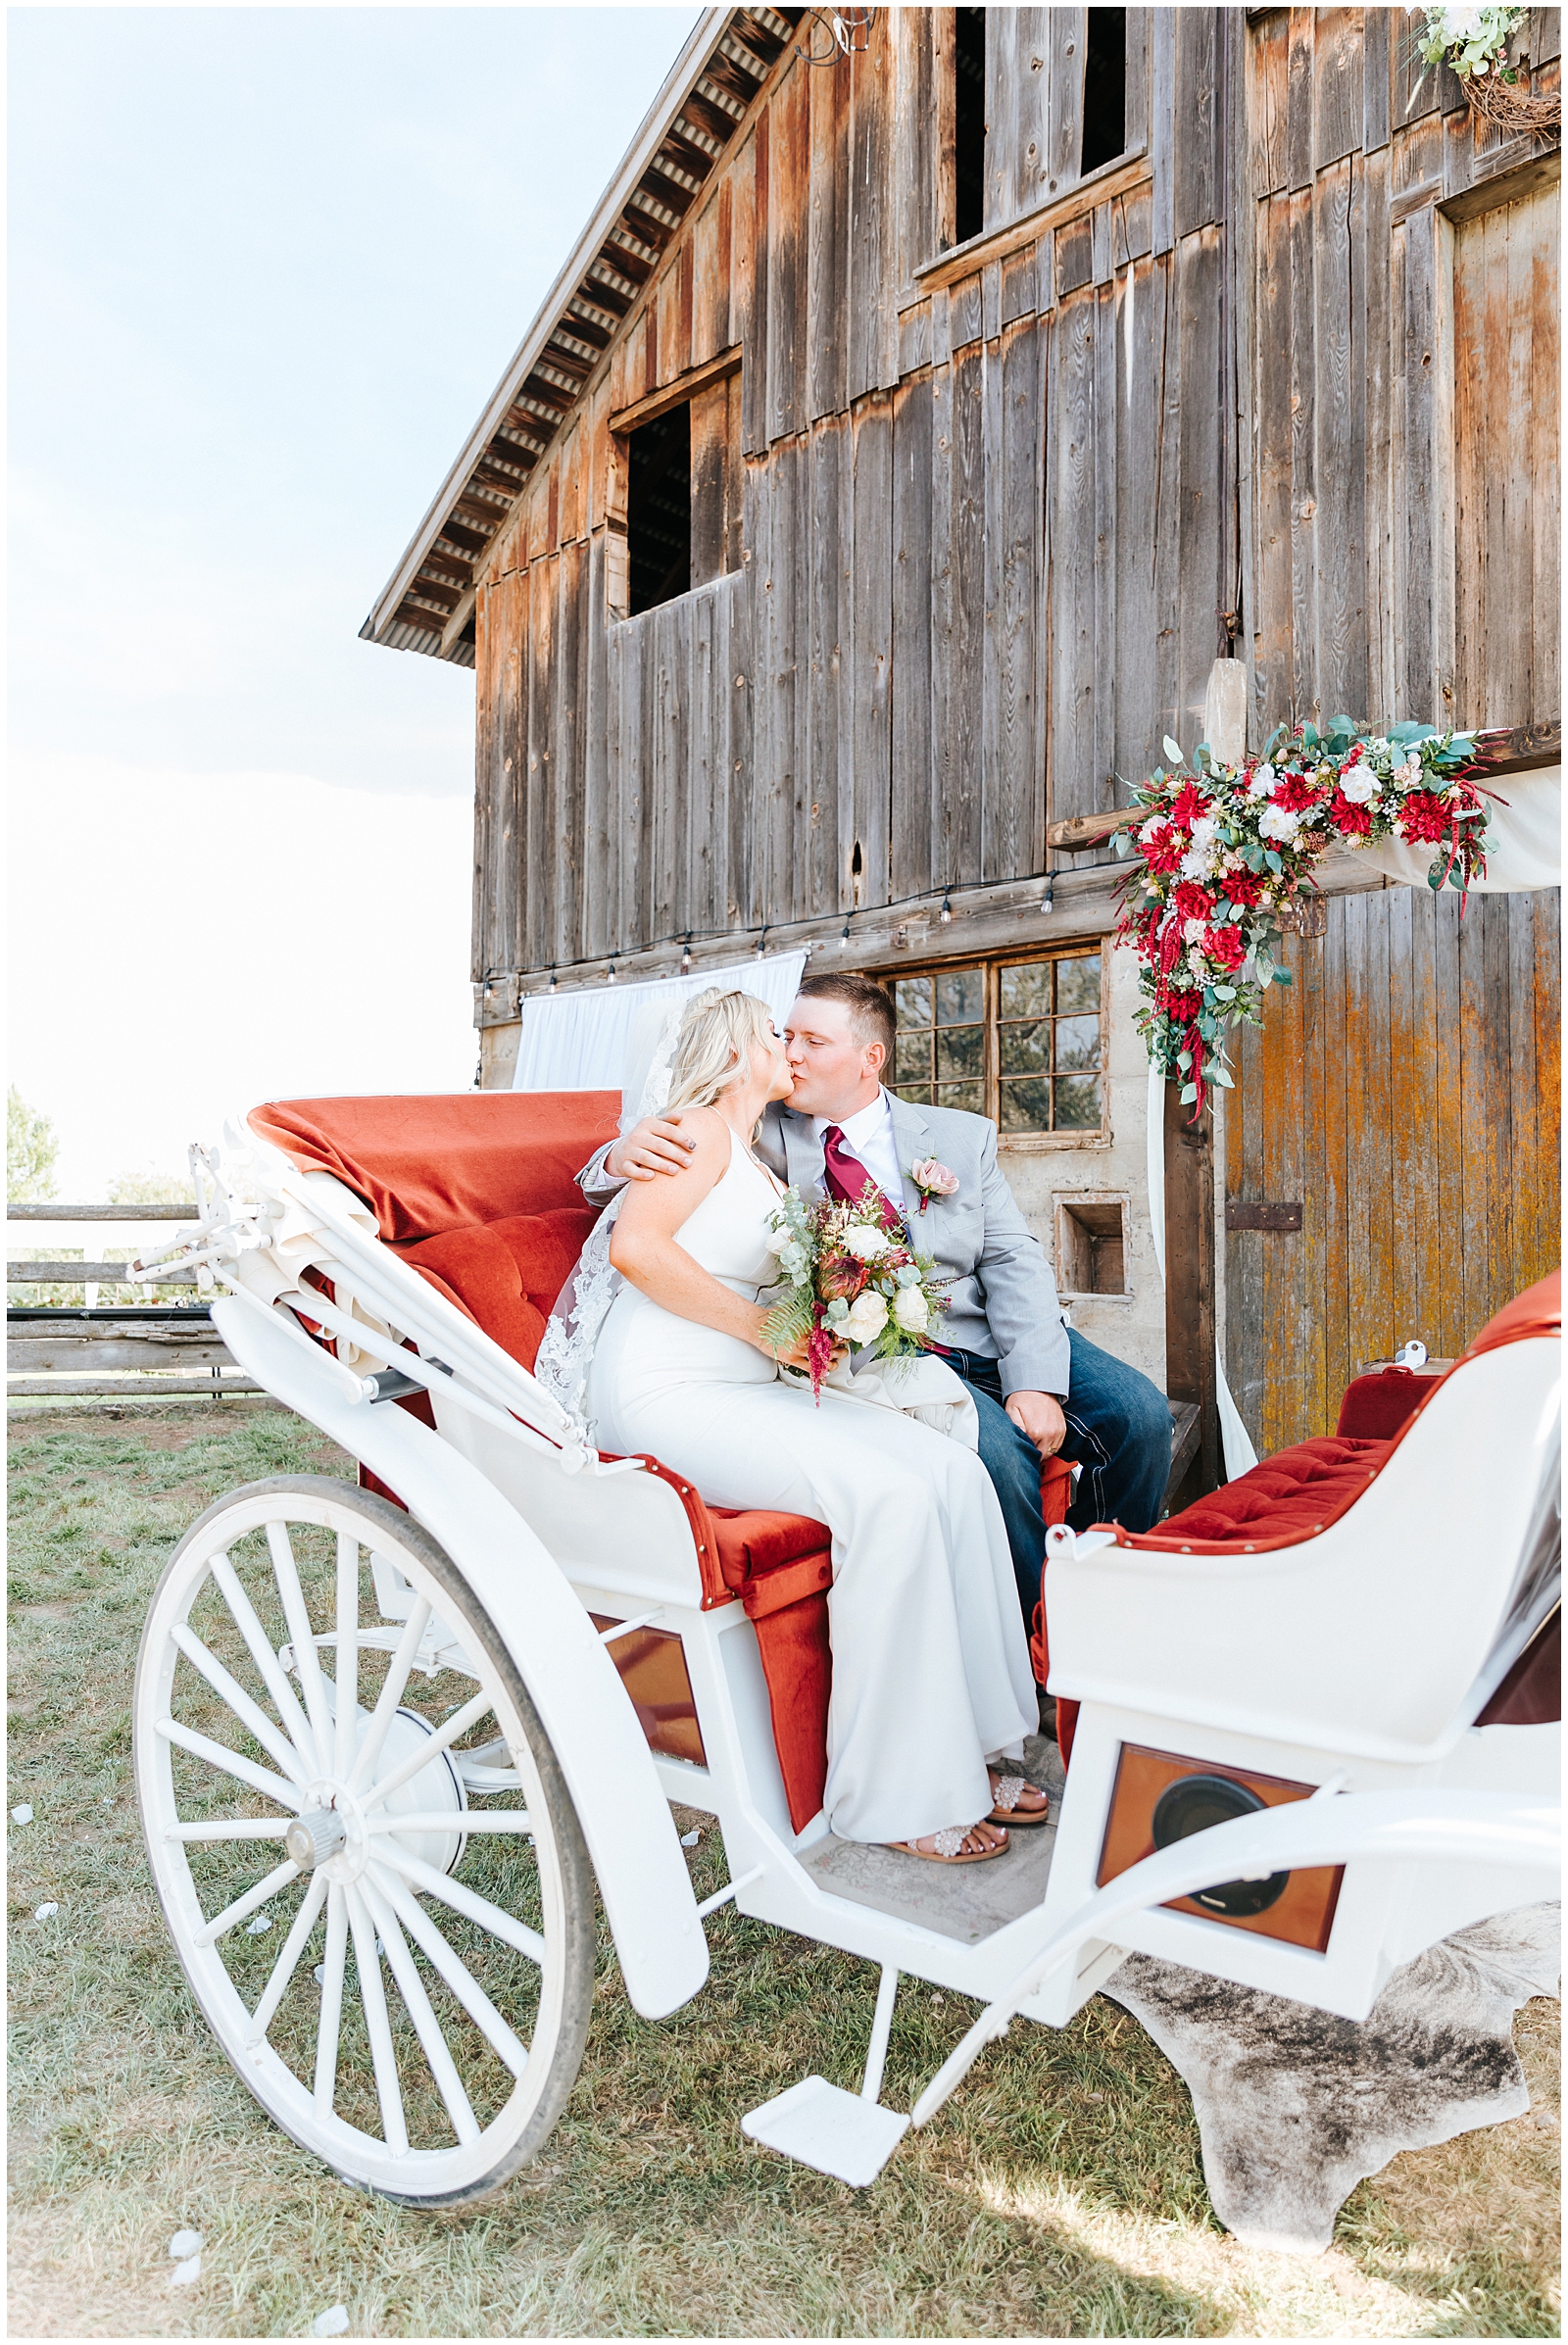 Bride and Groom exiting their Ceremony in a Horse Drawn Carriage